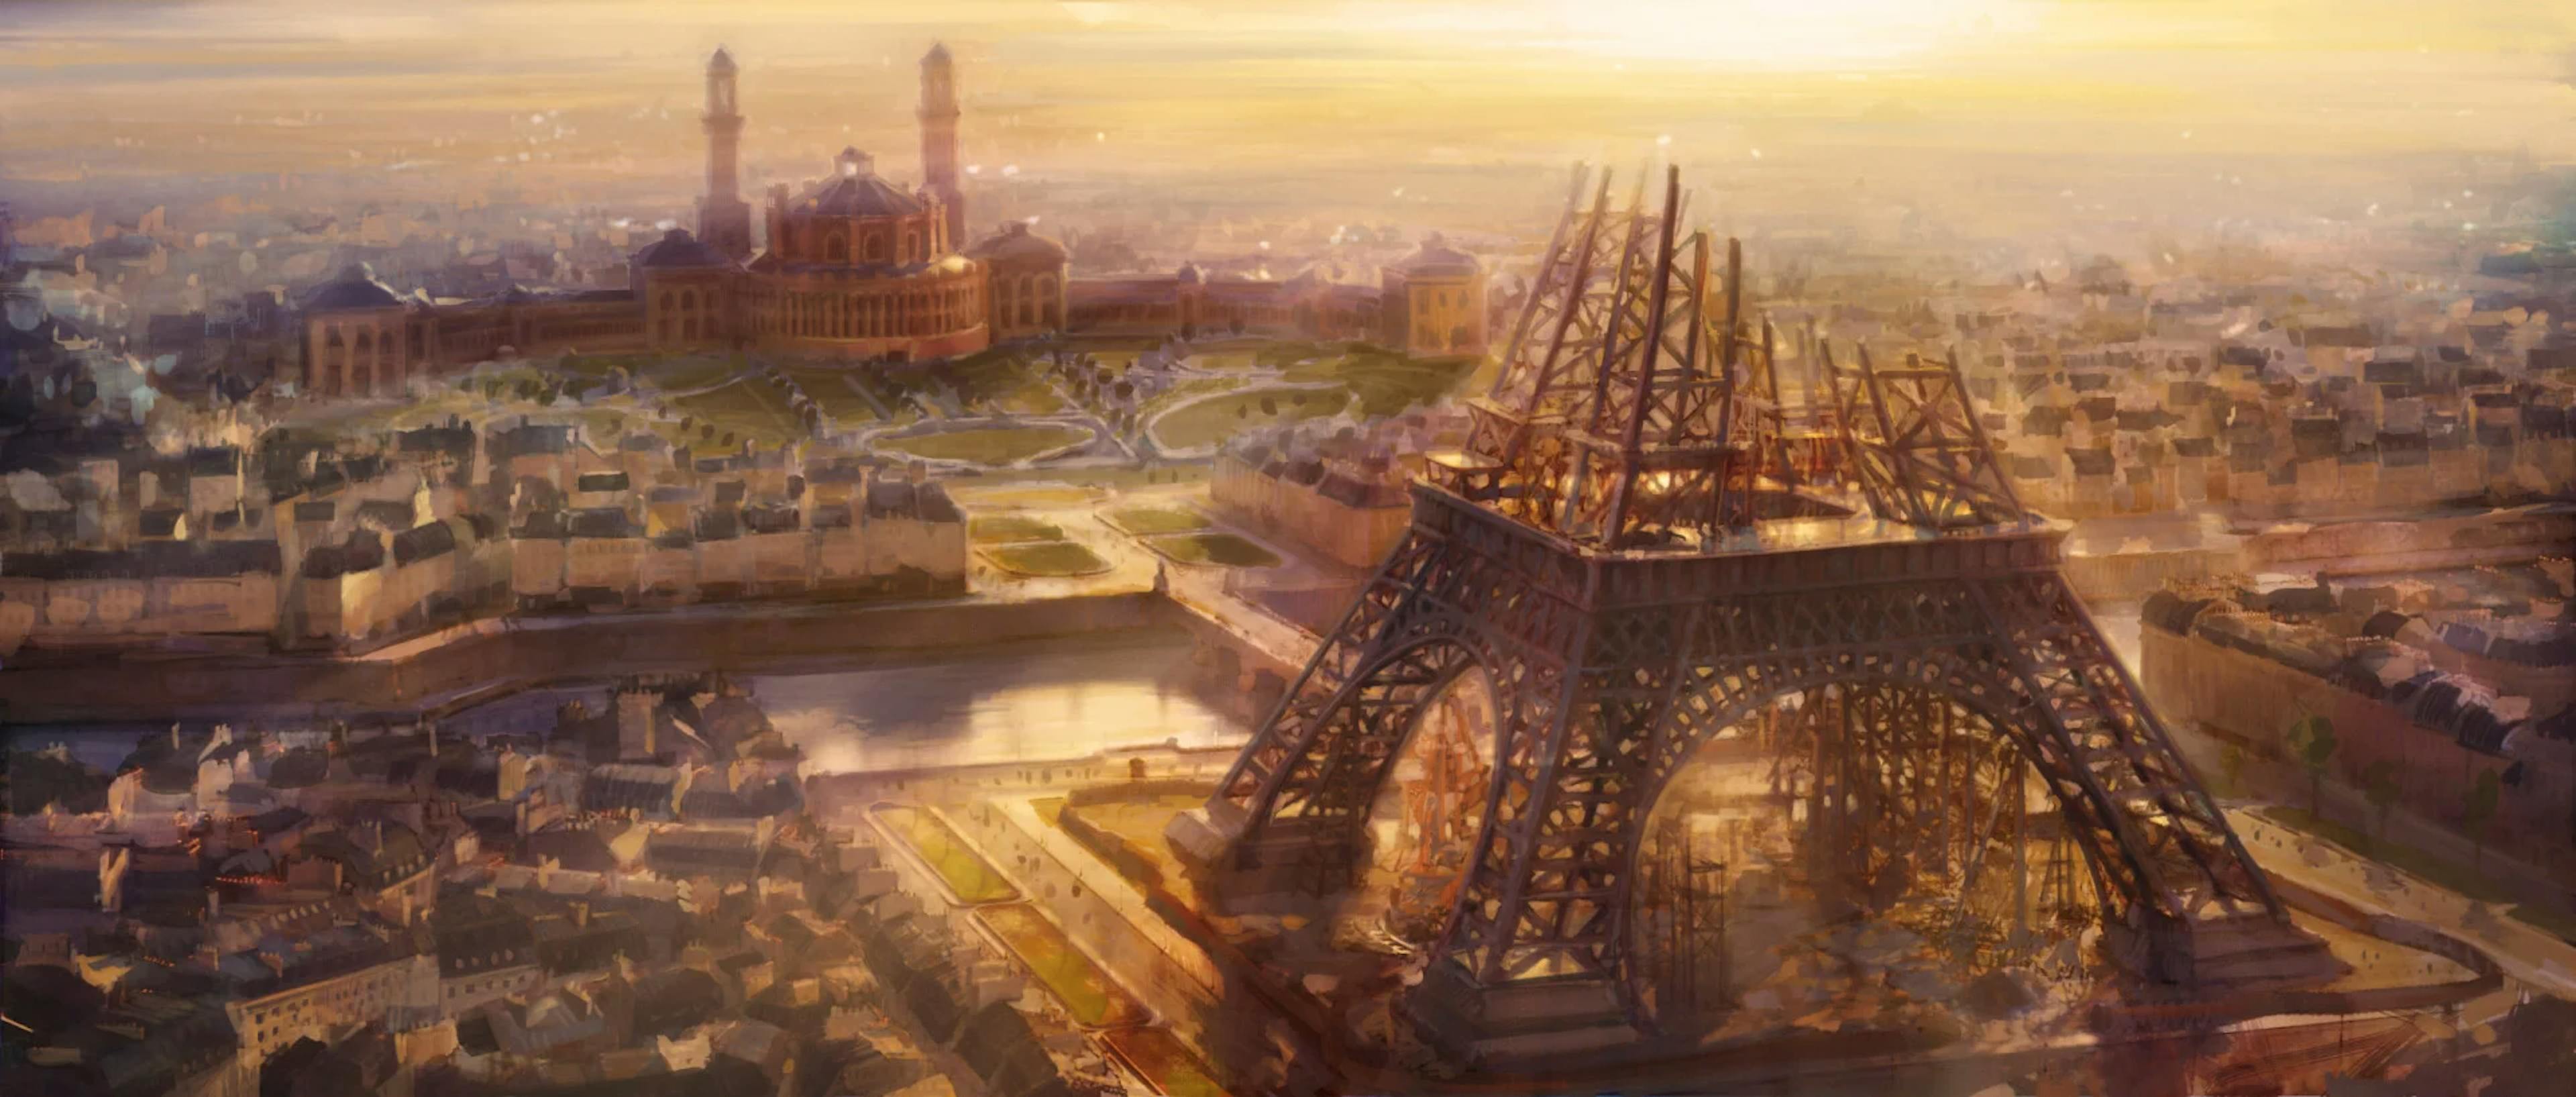 A painting of the Eiffel Tower under construction